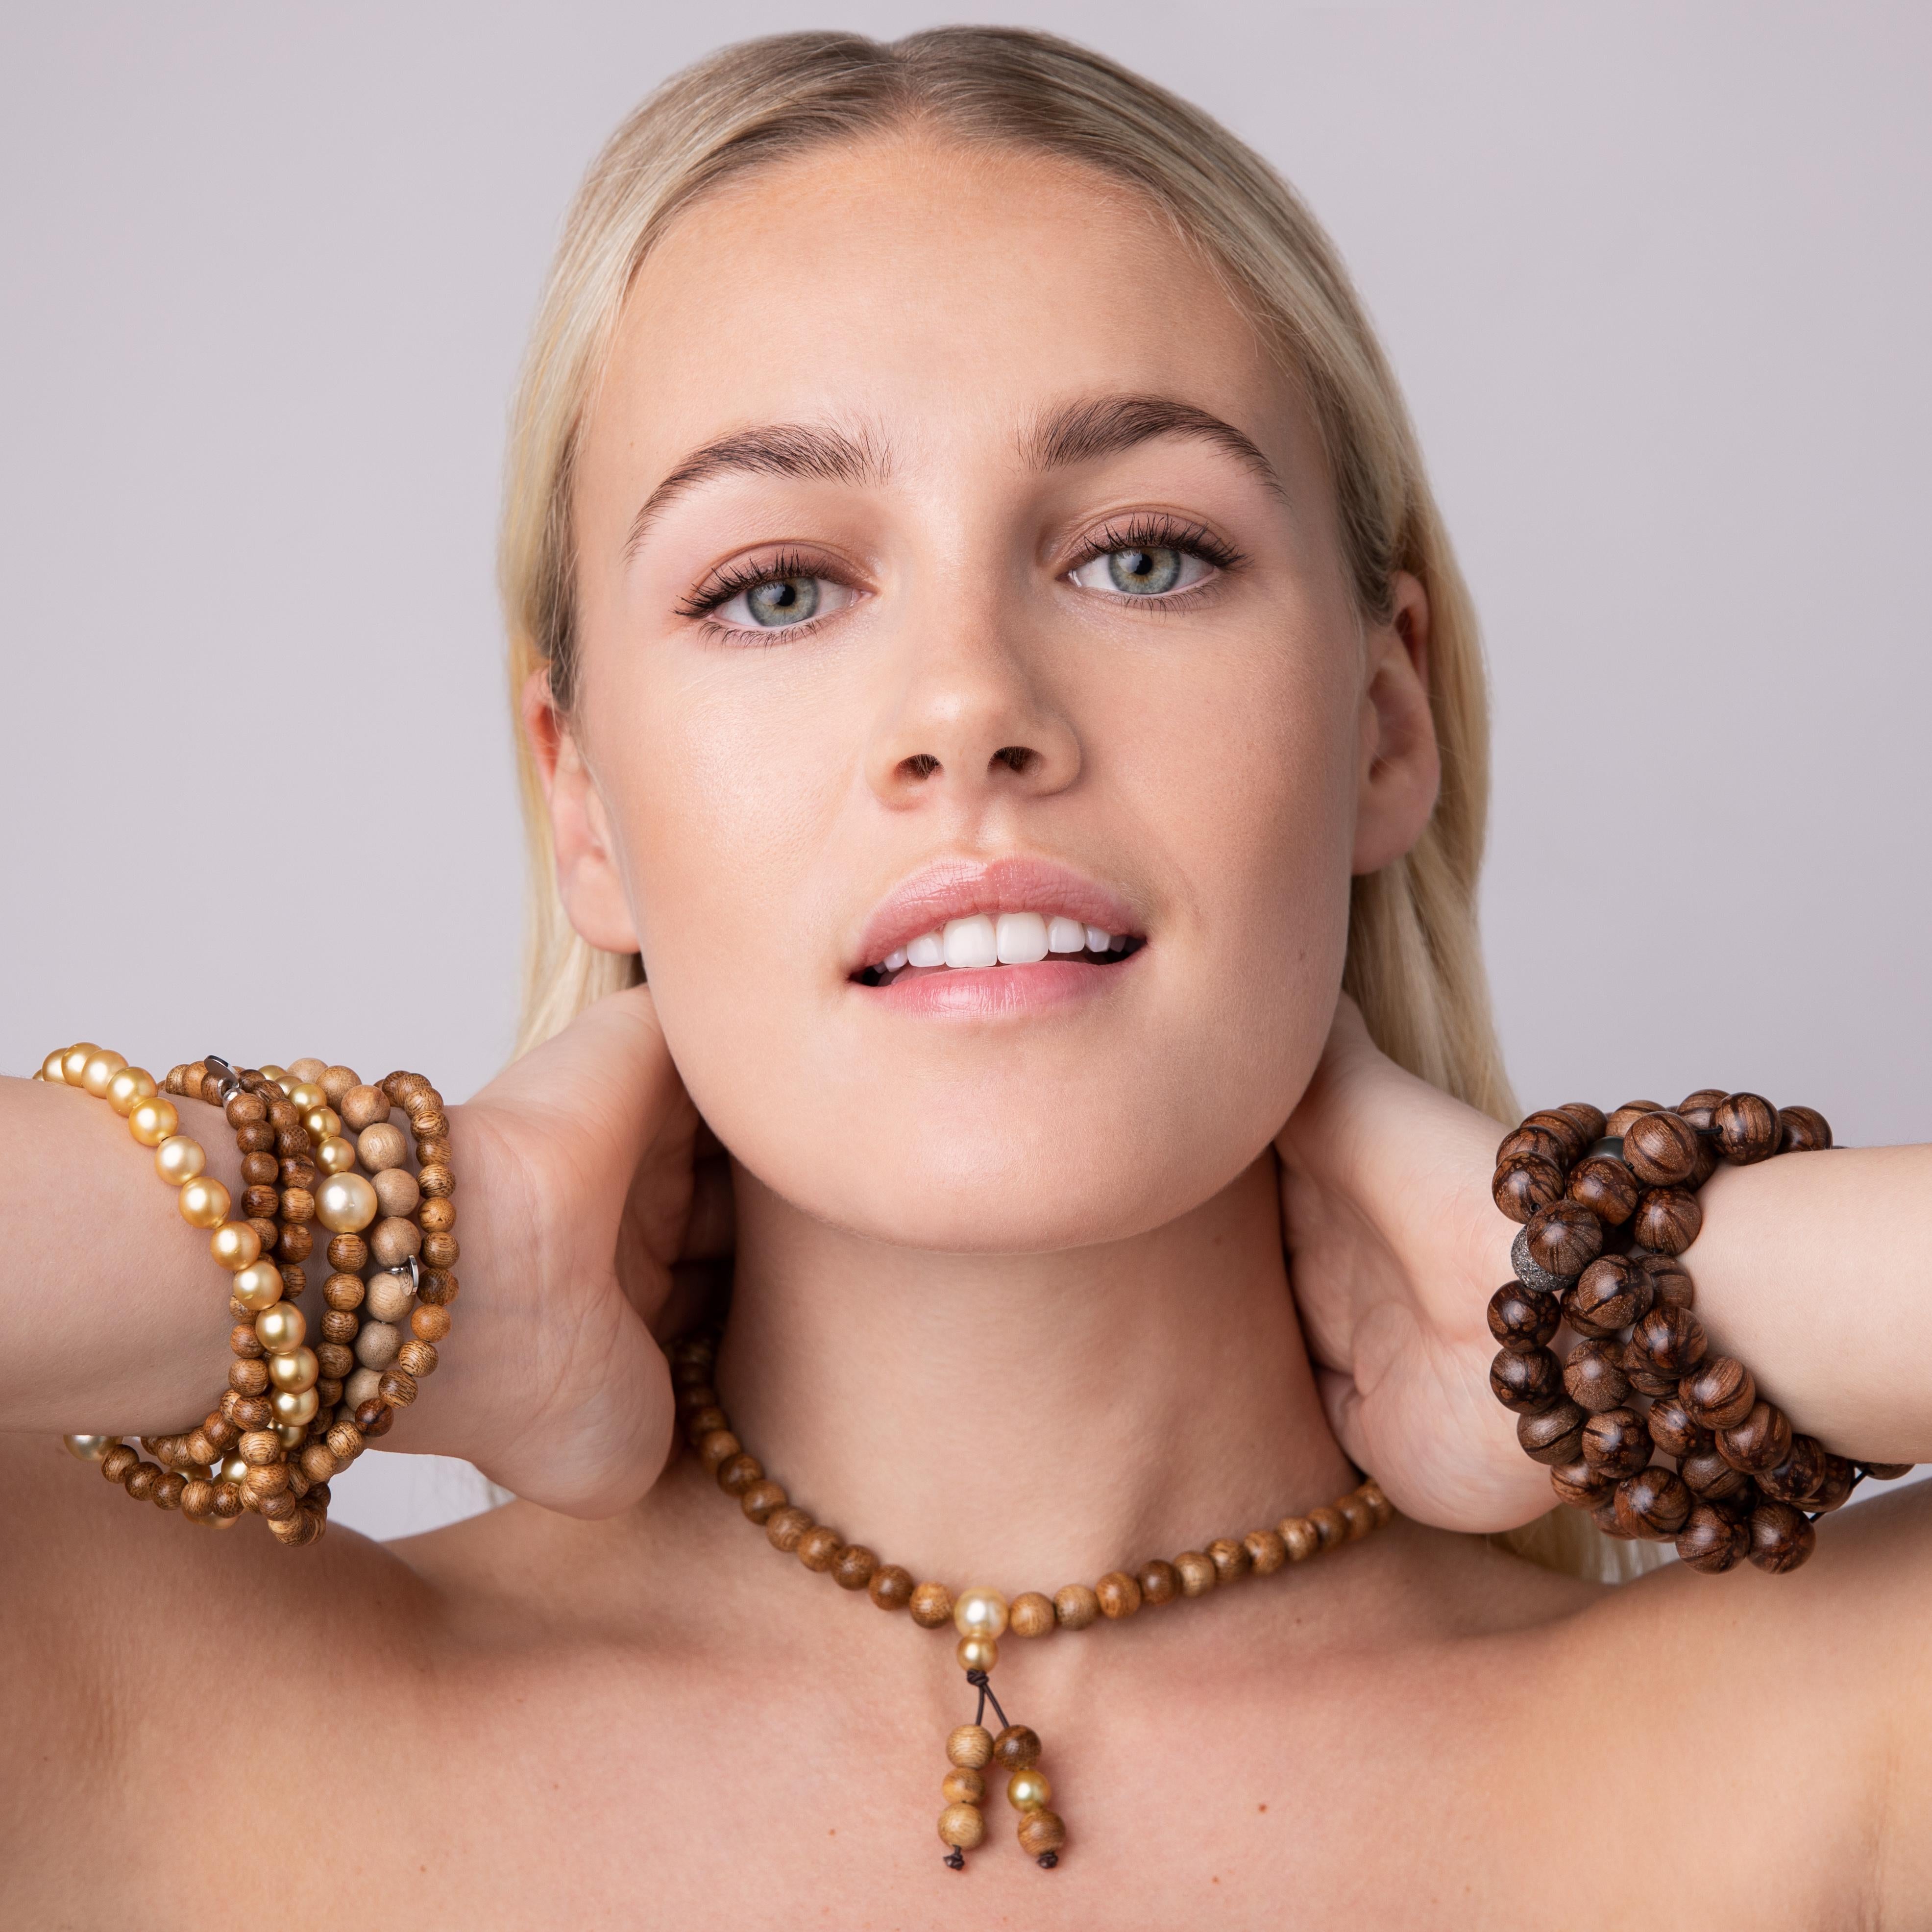 This jewelry piece is inspired by the Buddhist prayer necklaces. It can be worn as a shorter necklace or wrapped around the wrist. It is captivating with its intriguing golden pearls. Its elegance and casualness are amazing and it can be worn with